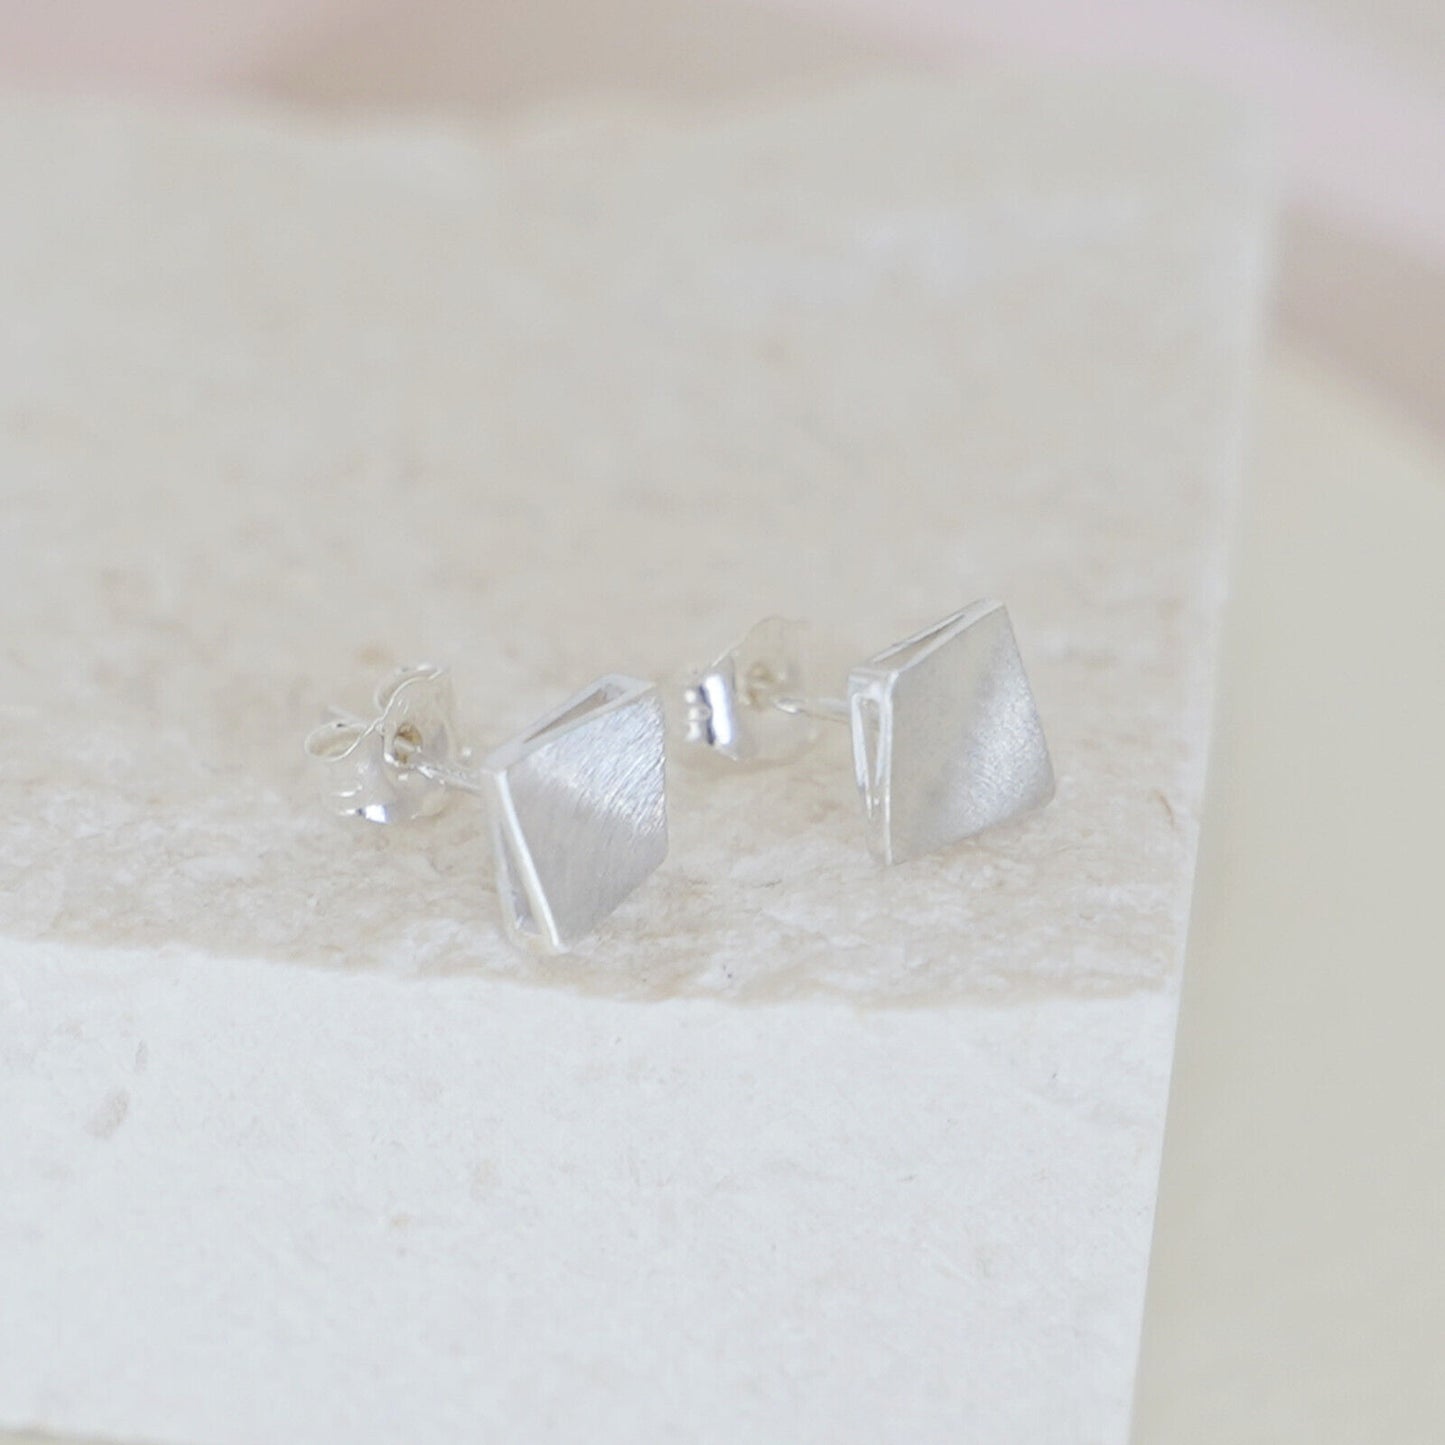 6mm Brushed Square Stud Earrings in 925 Sterling Silver with Bent Corners